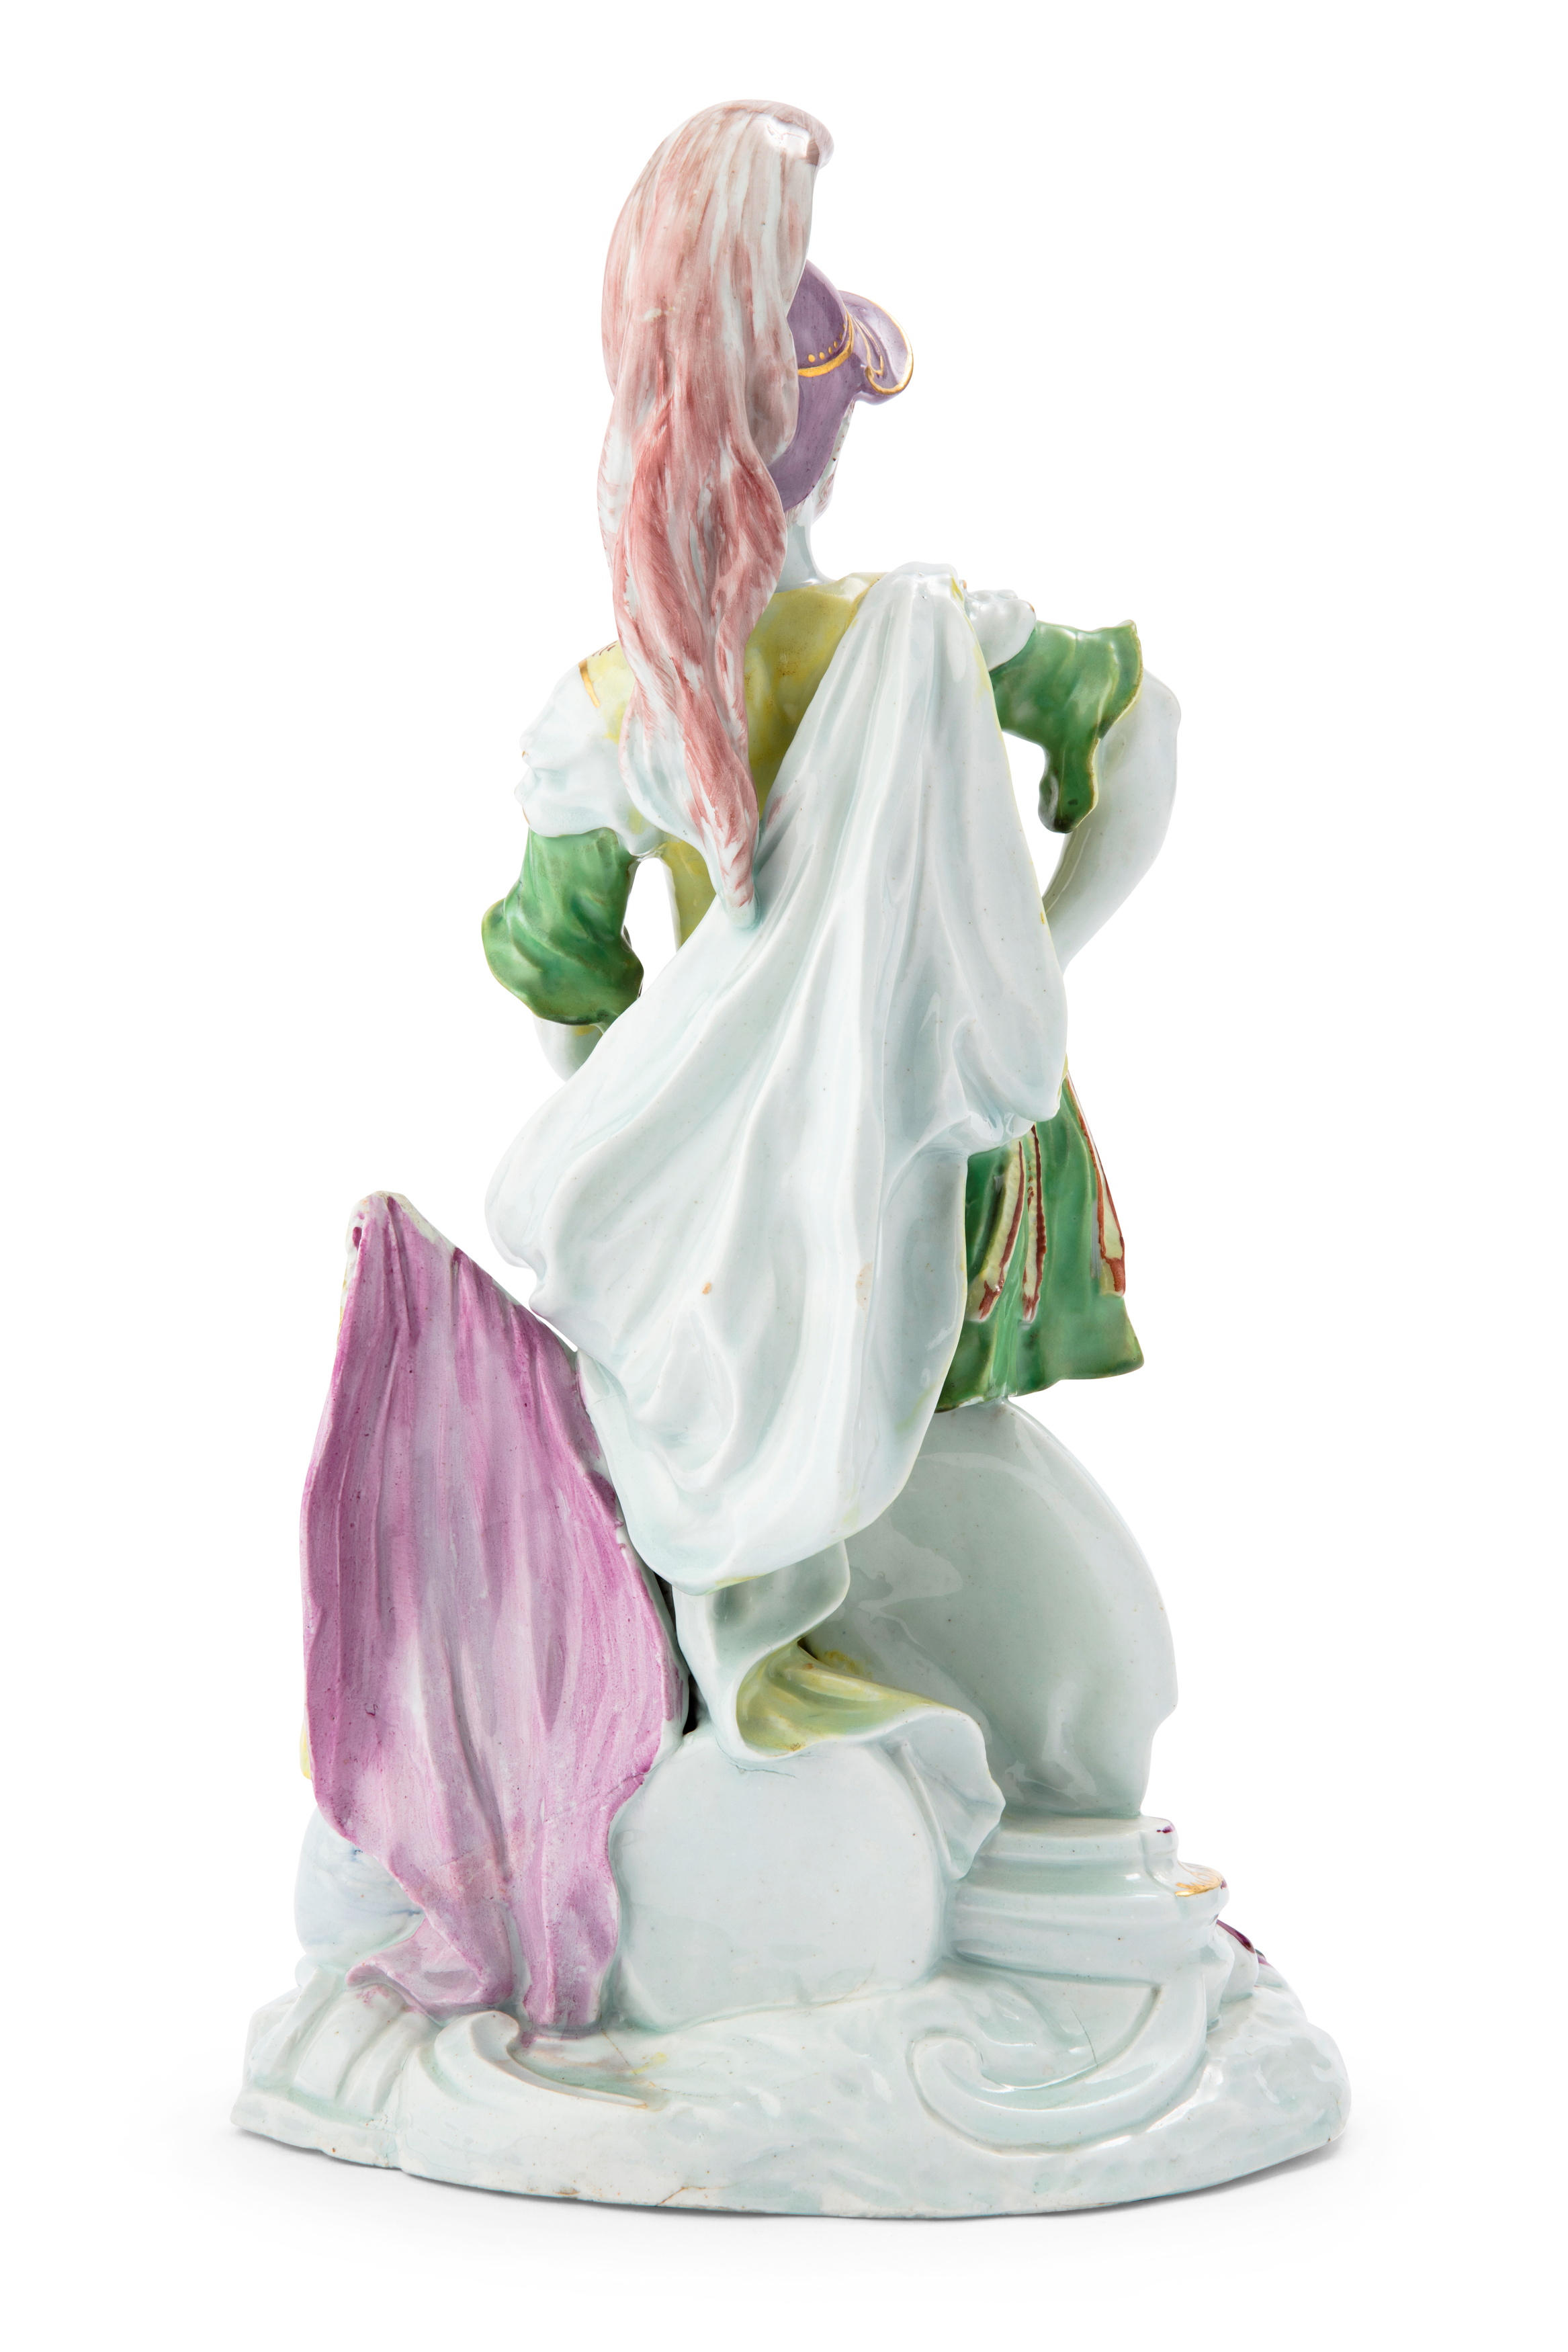 'Mars' porcelain figure made by William Duesbury & Co